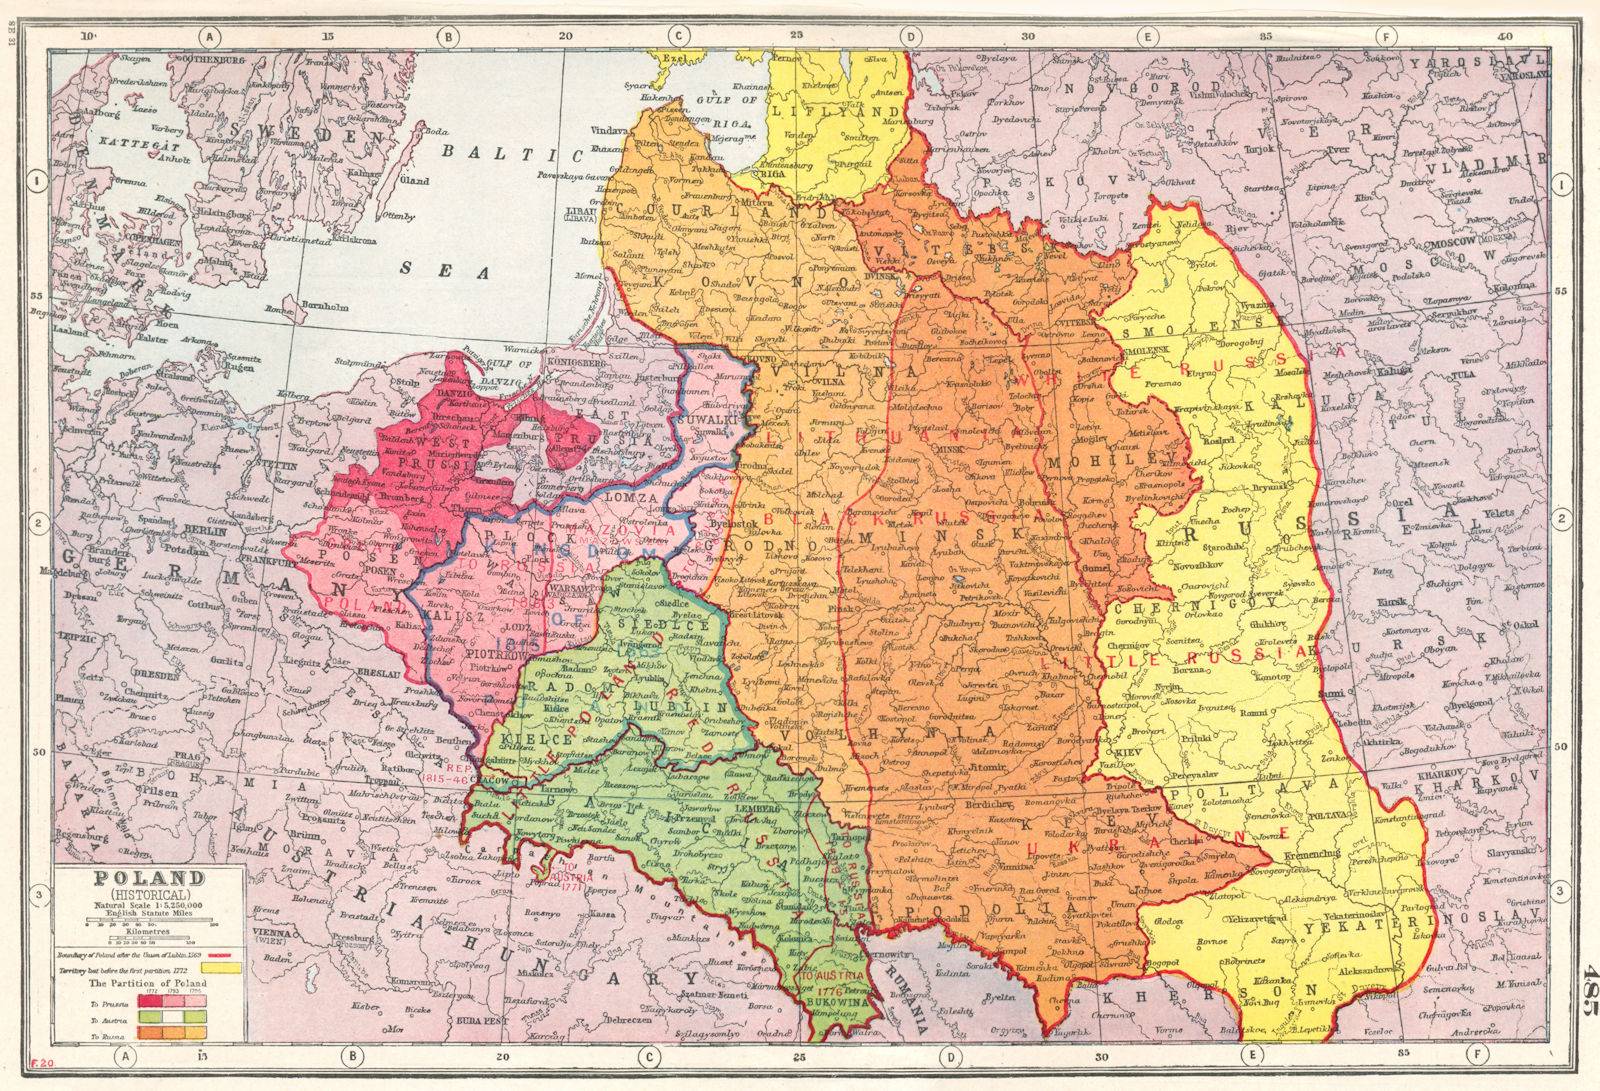 POLAND.Showing partition between Prussia Austria Russia 1772-1795 1920 old map